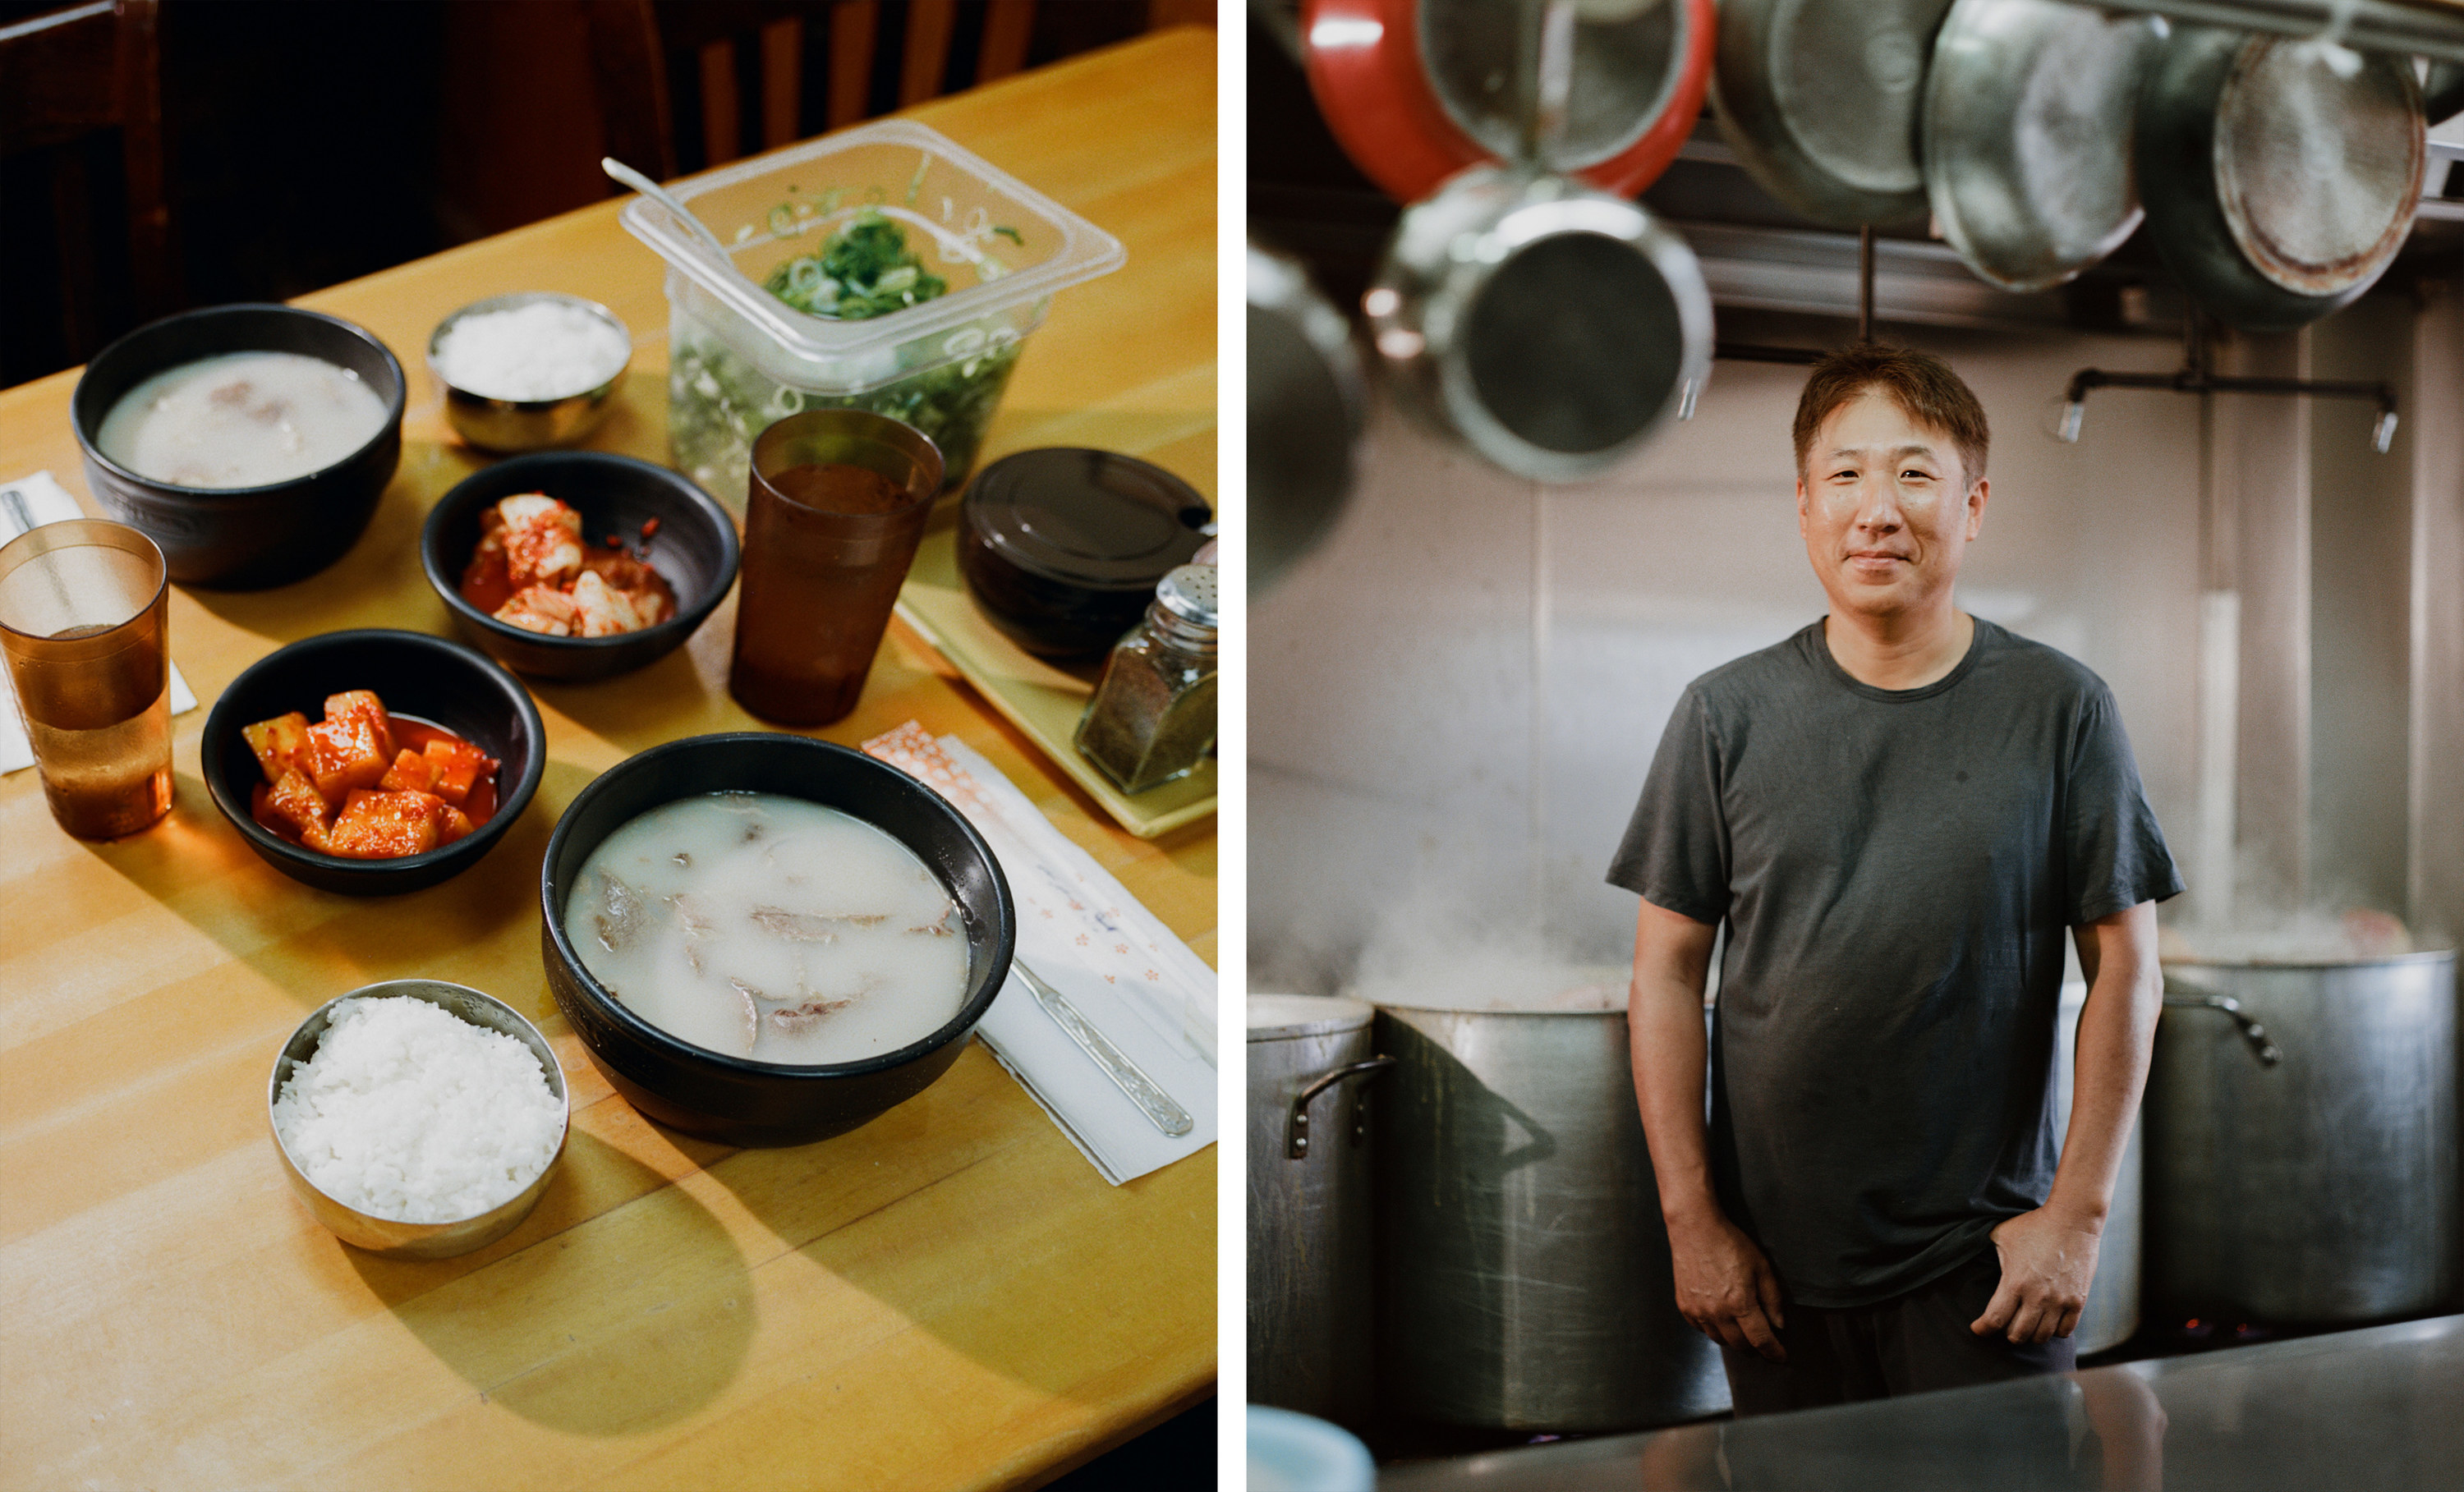 Left, a mean of sulluntang, and on the right, the owner in the kitchen in front of pots